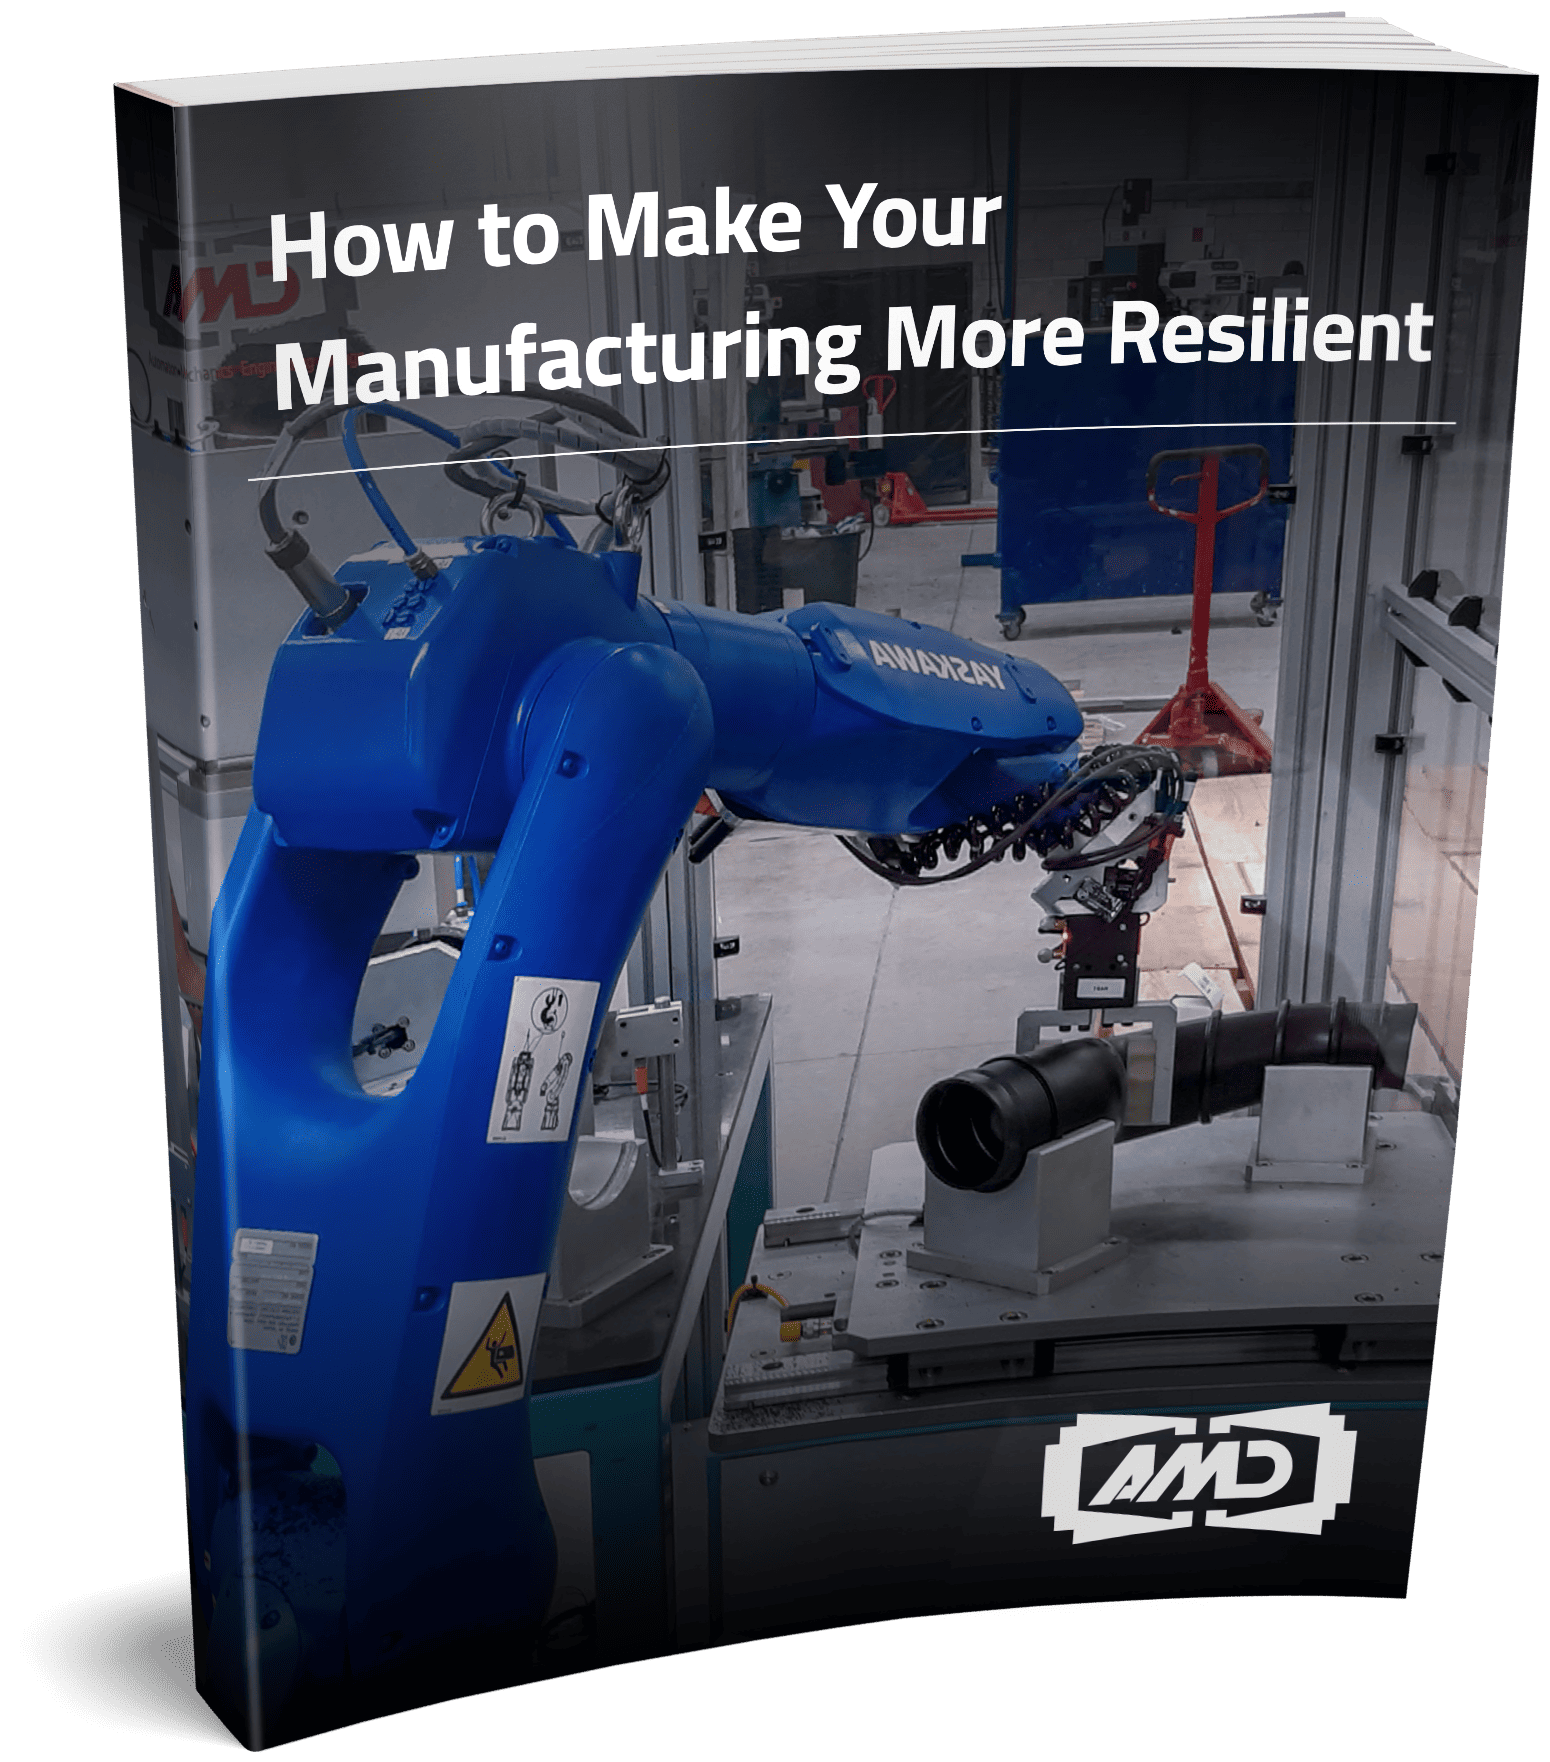 How to Make Your Manufacturing More Resilient